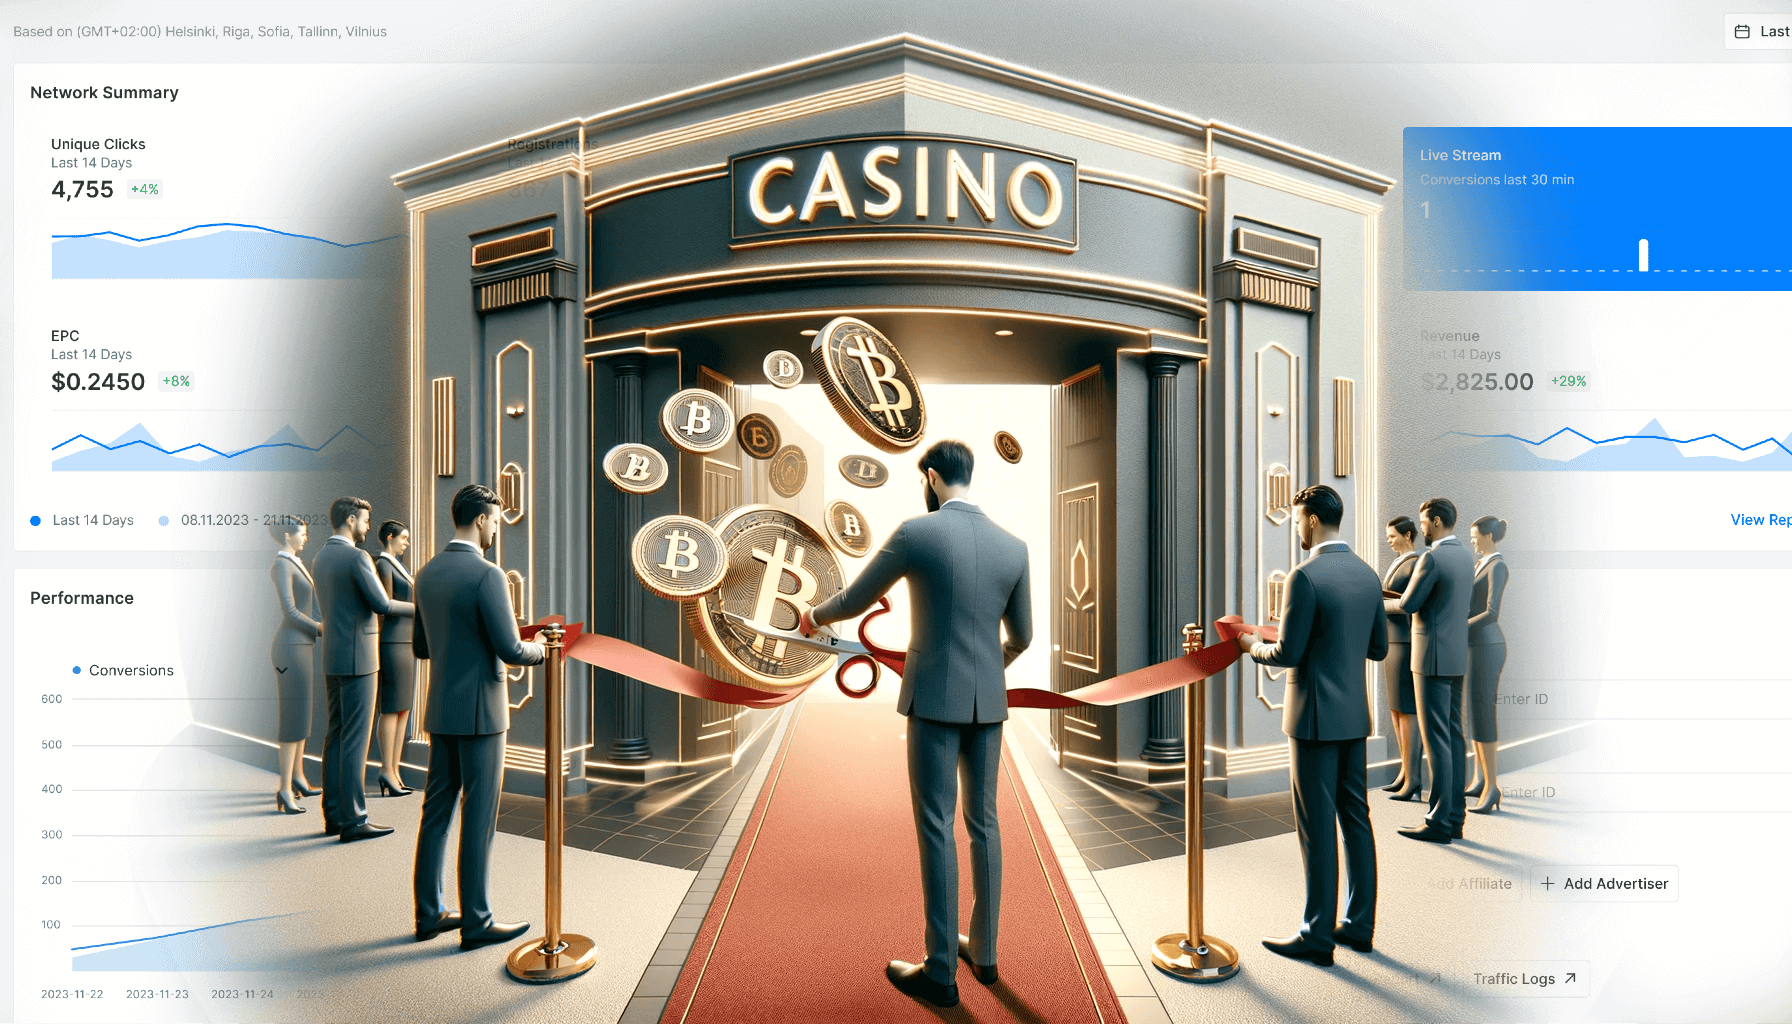 10 Factors That Affect Customer Support in Indian Online Casinos: What to Expect